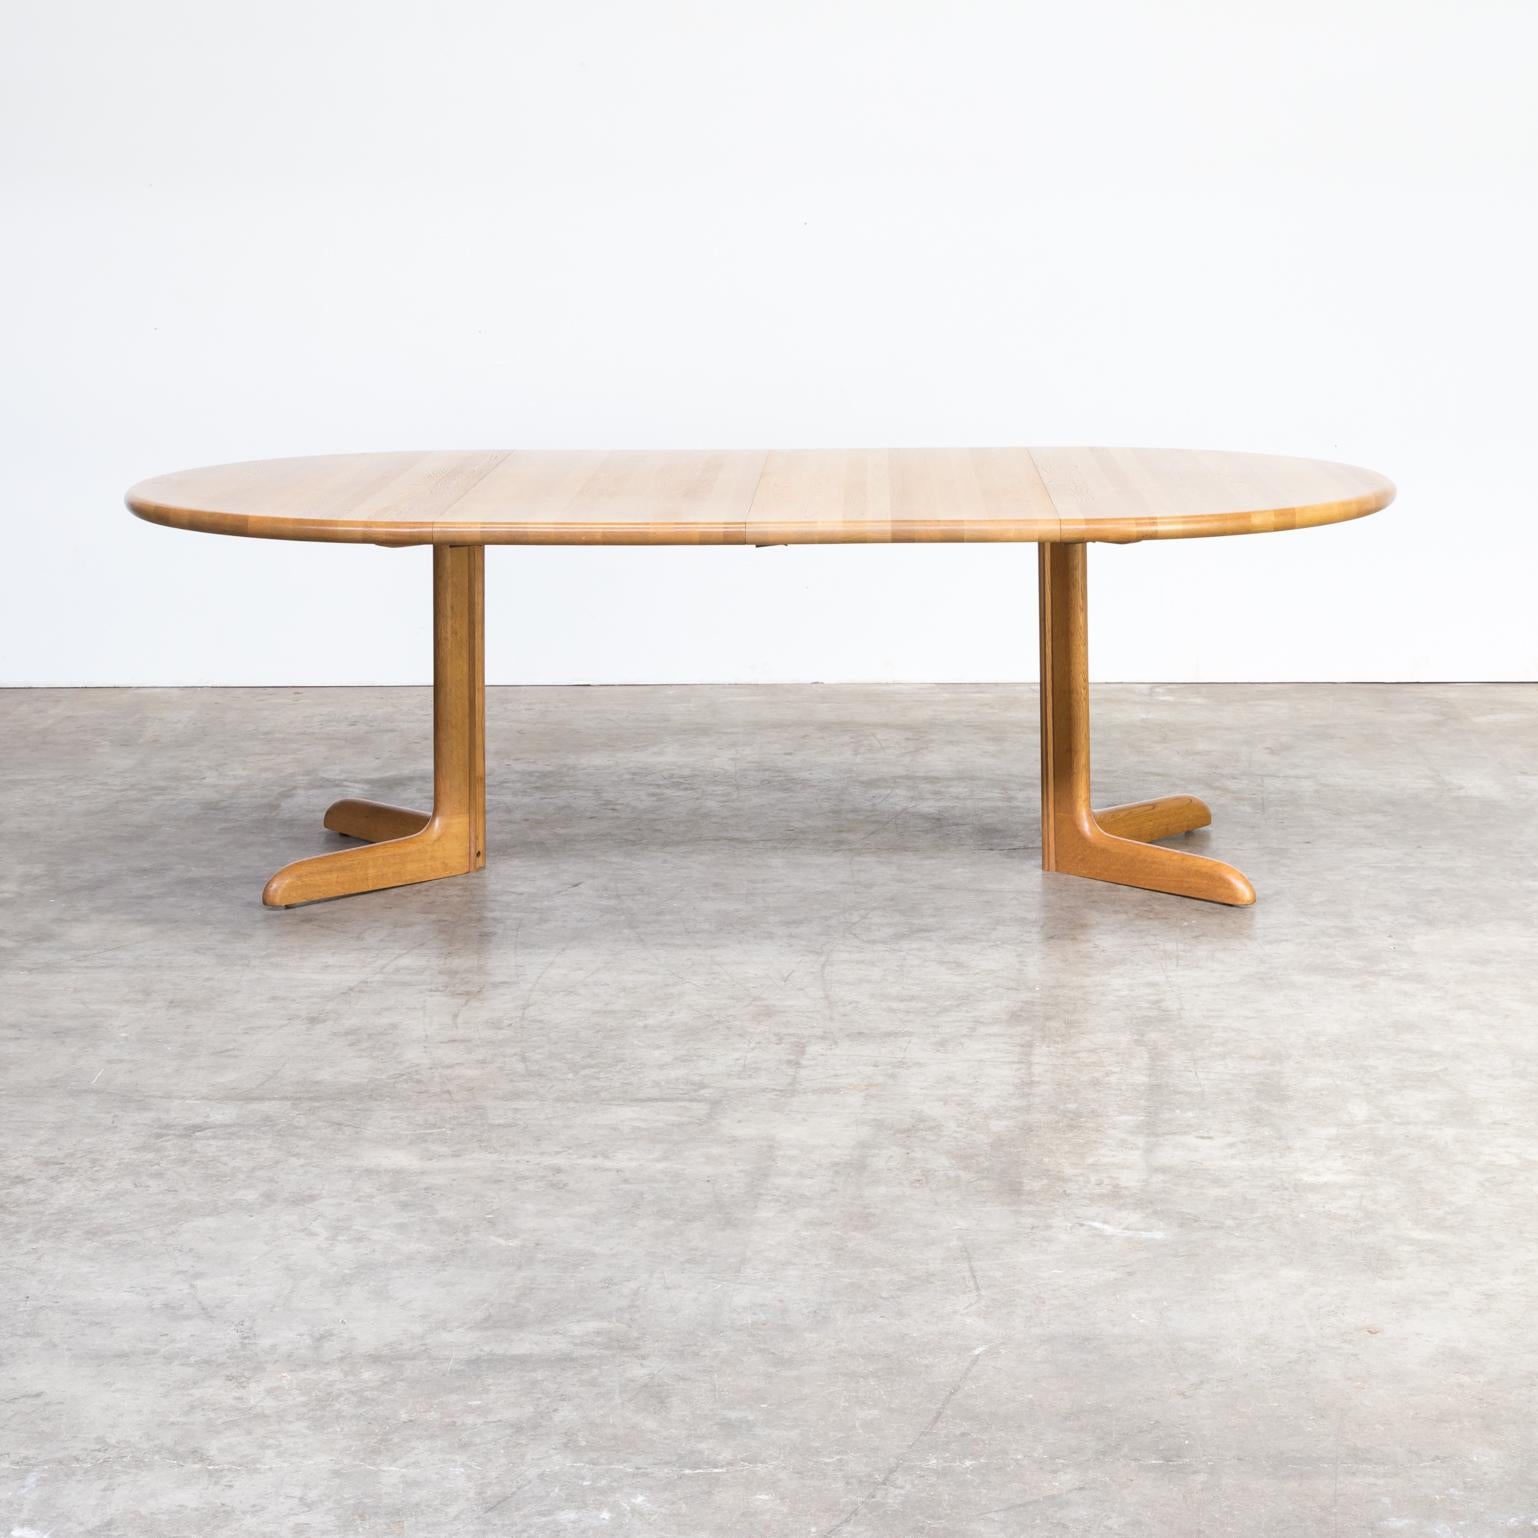 1960s Niels Otto Møller extendable dining table for Gudme. Good condition, two extendable middle worktops, consistent with age and use.